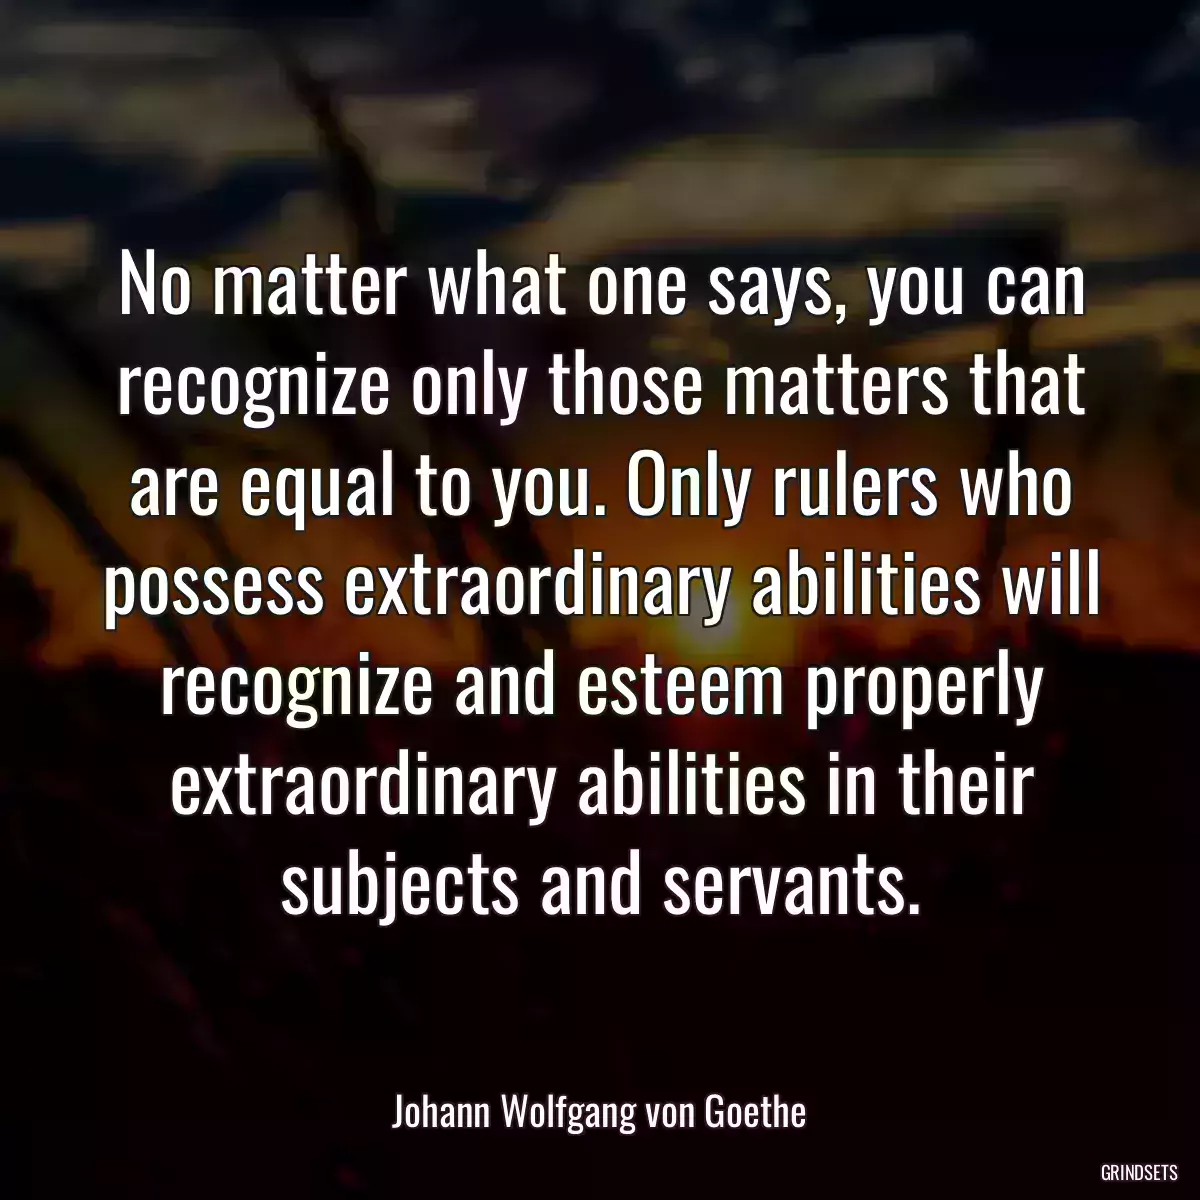 No matter what one says, you can recognize only those matters that are equal to you. Only rulers who possess extraordinary abilities will recognize and esteem properly extraordinary abilities in their subjects and servants.